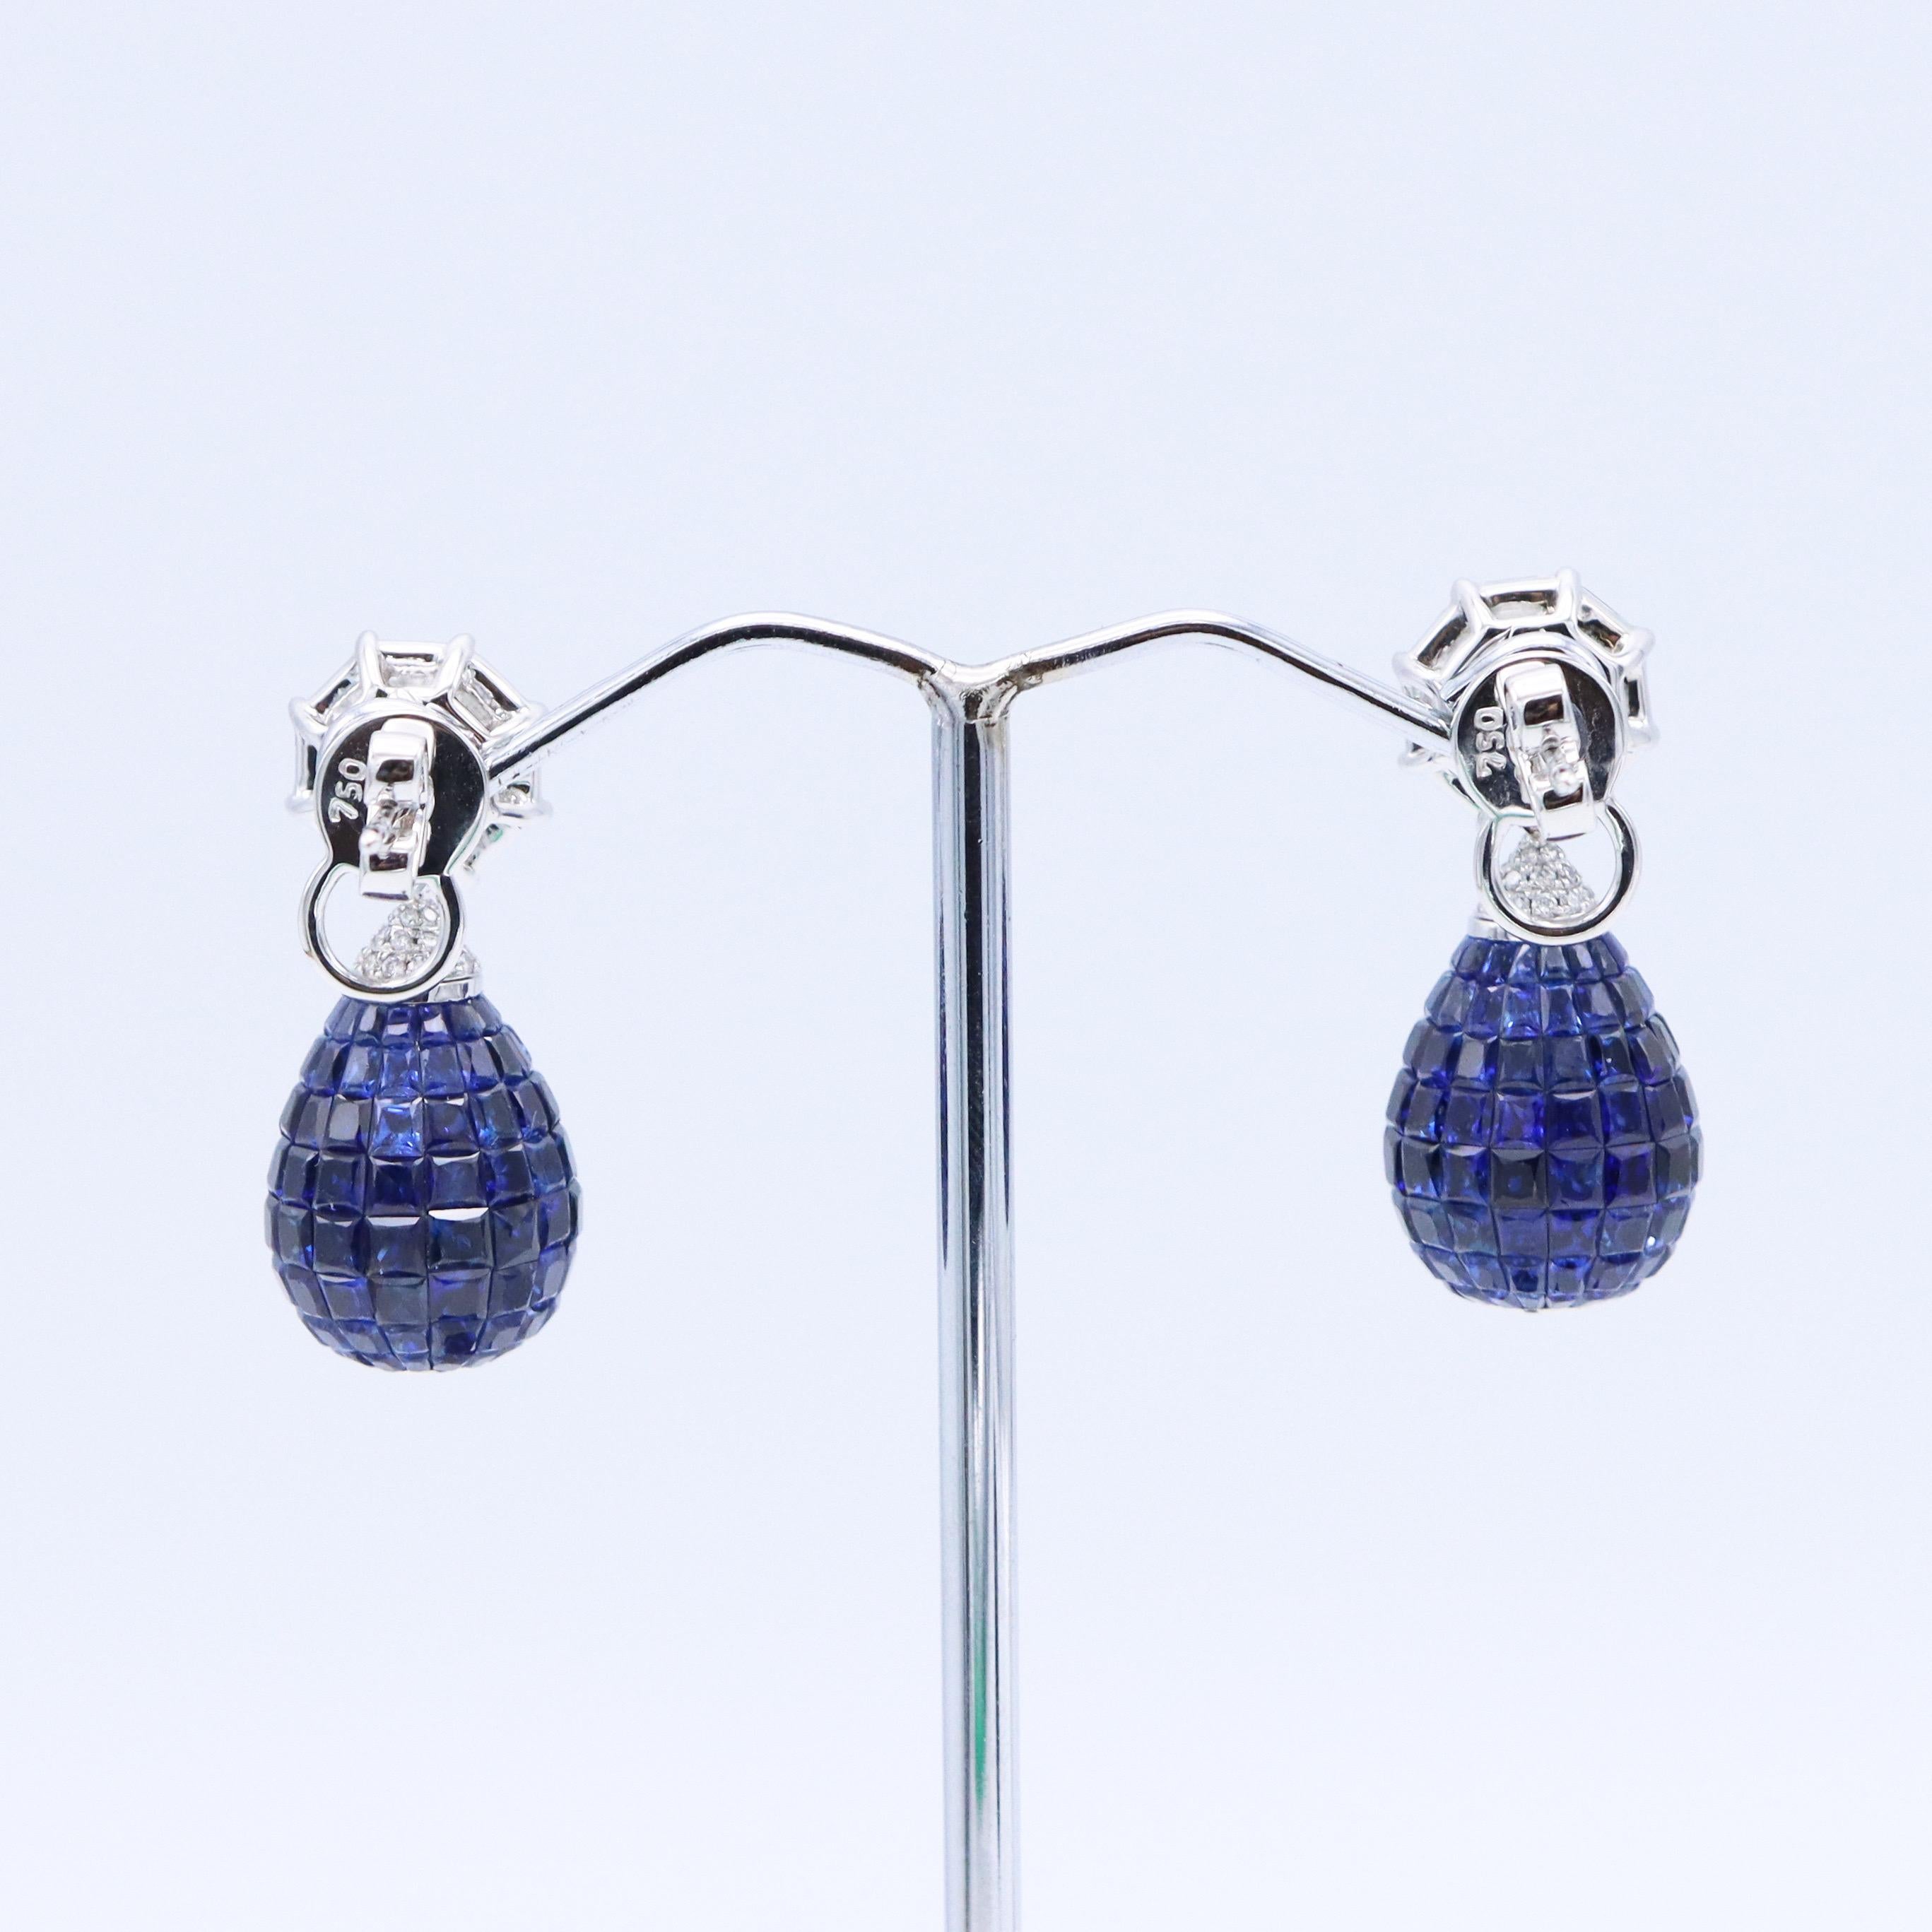 From the vault at Emilio Jewelry located on New York's iconic Fifth Avenue,
Featuring an array of fancy cut diamonds and cornflower blue high quality princess cut sapphires set into an astonishing design that can be dressed up, or worn casually